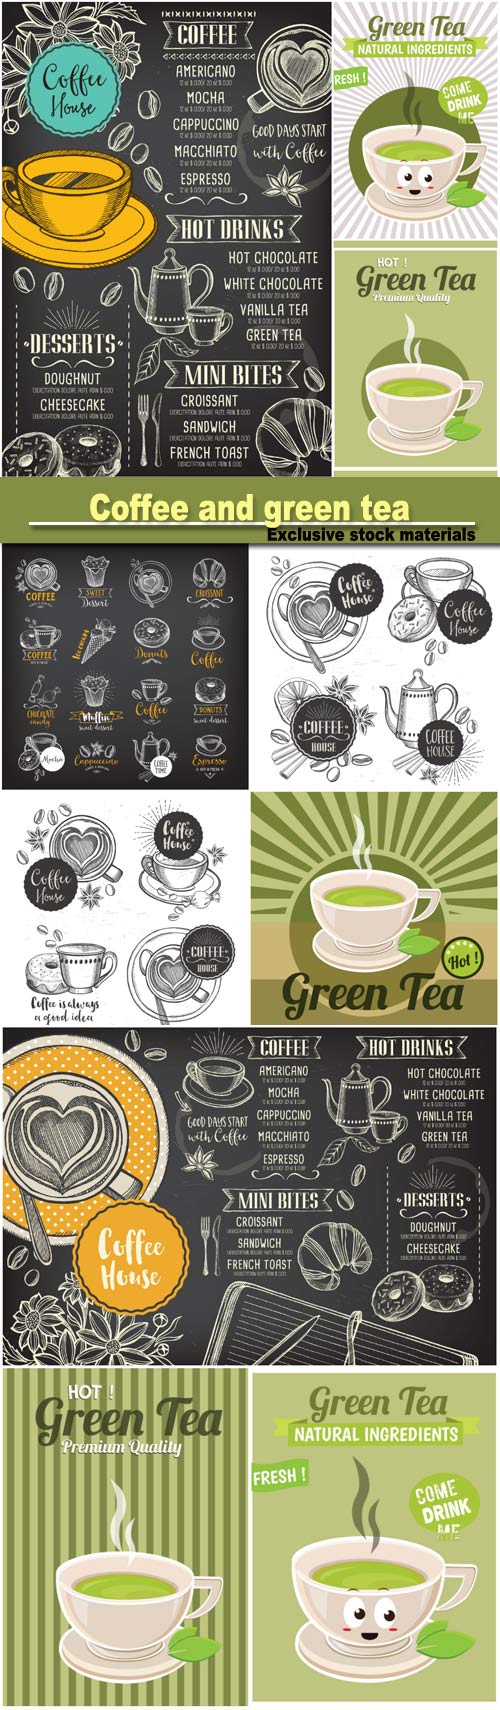 Vintage posters of coffee and green tea